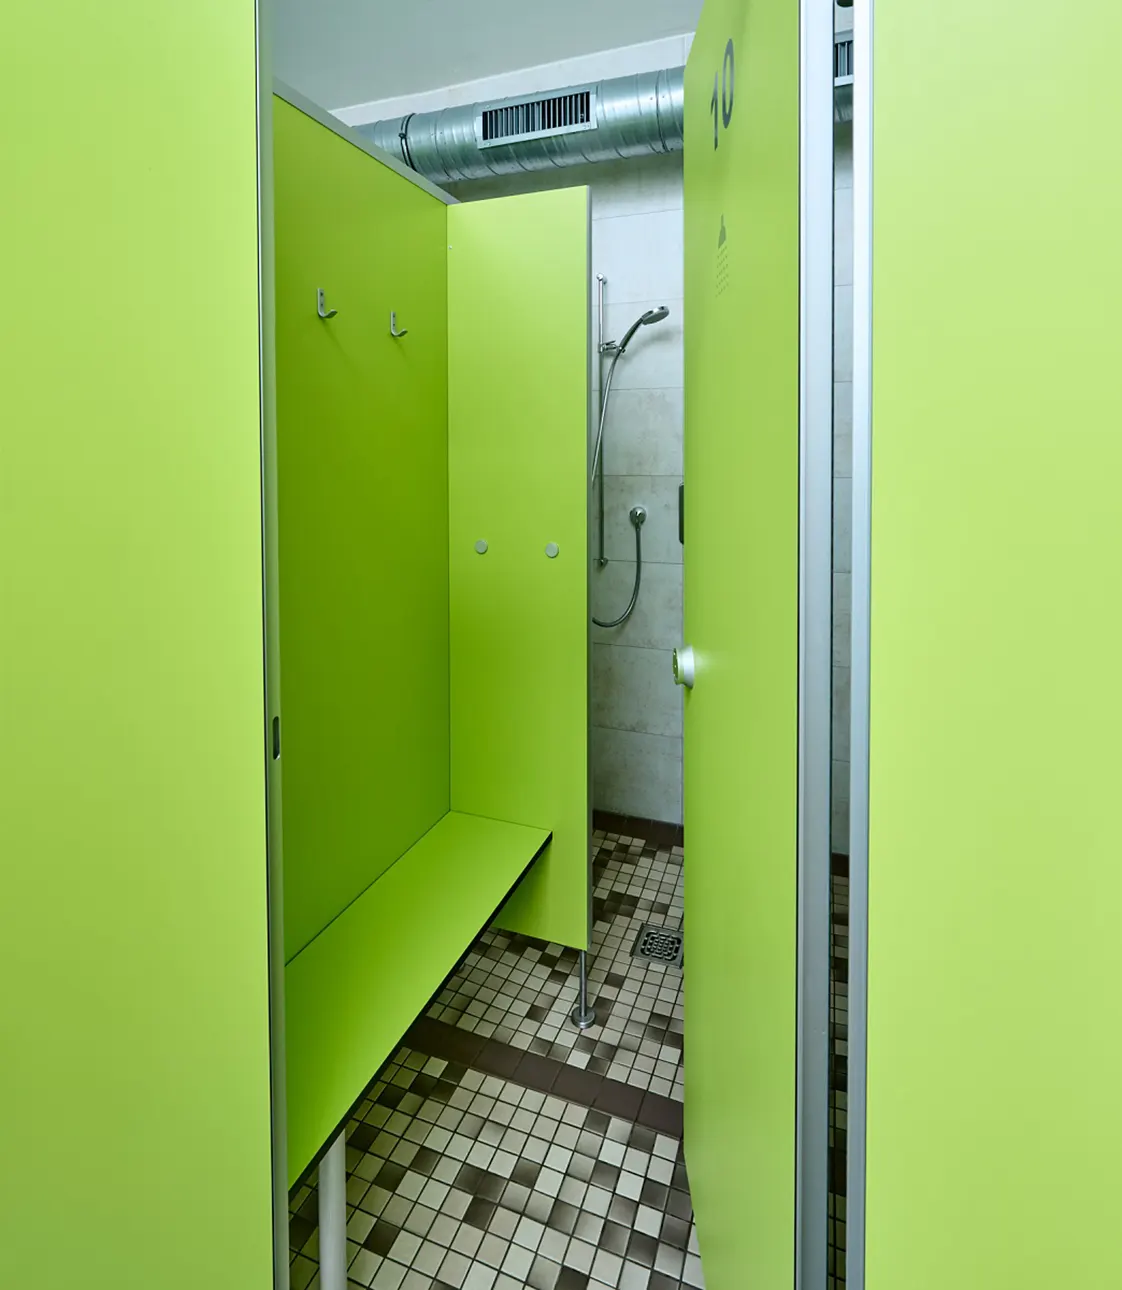 Matching shower partitions to the toilet cubicles